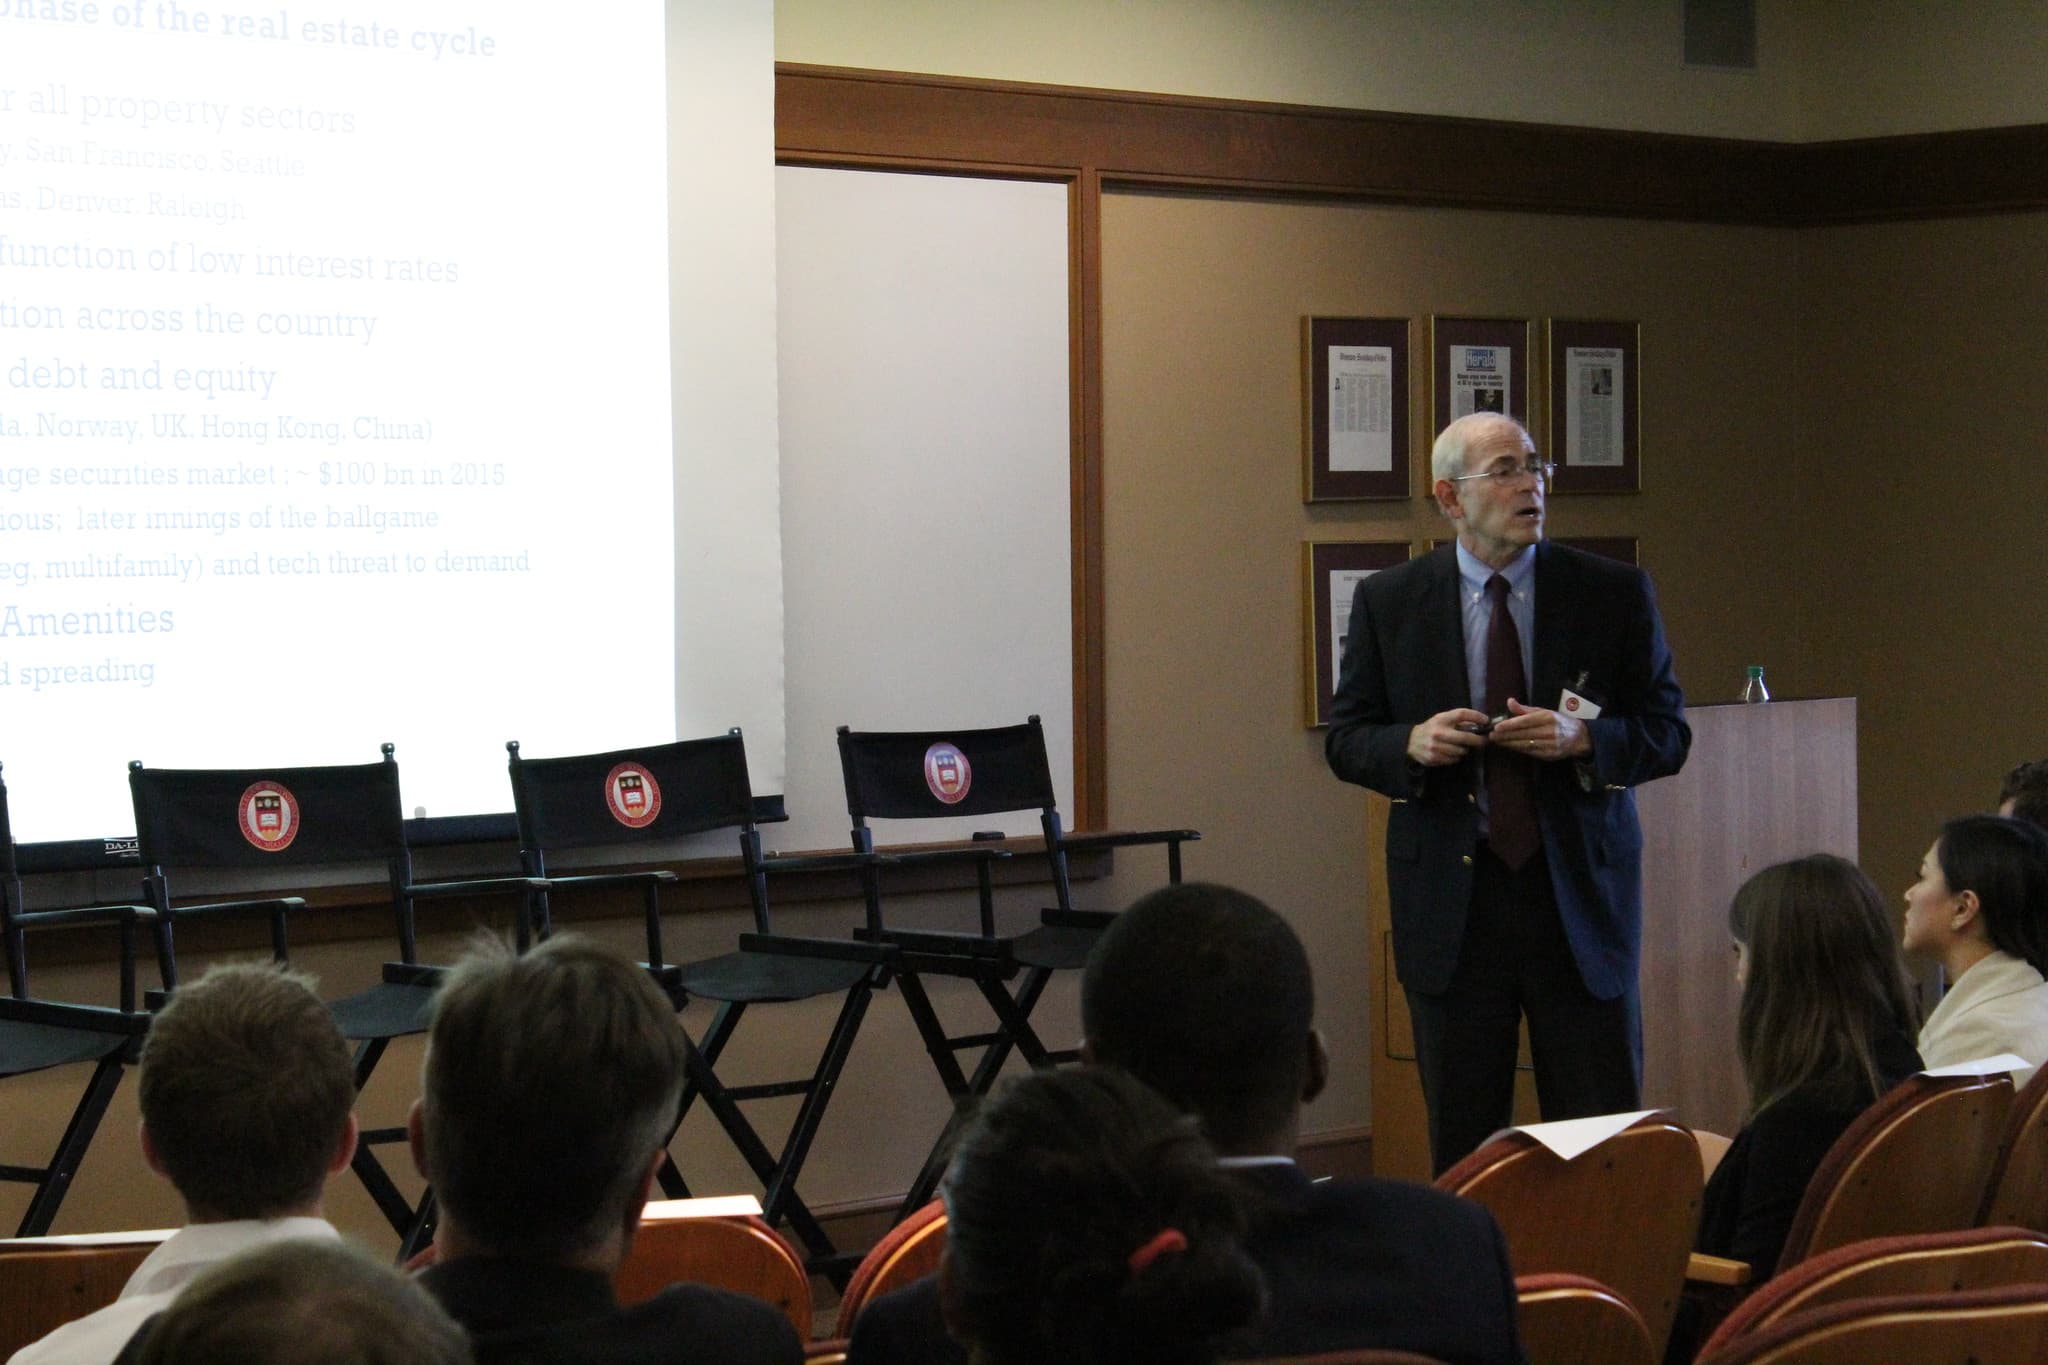 Carroll School Senior Lecturer Ed Chazen speaking in front of an audience